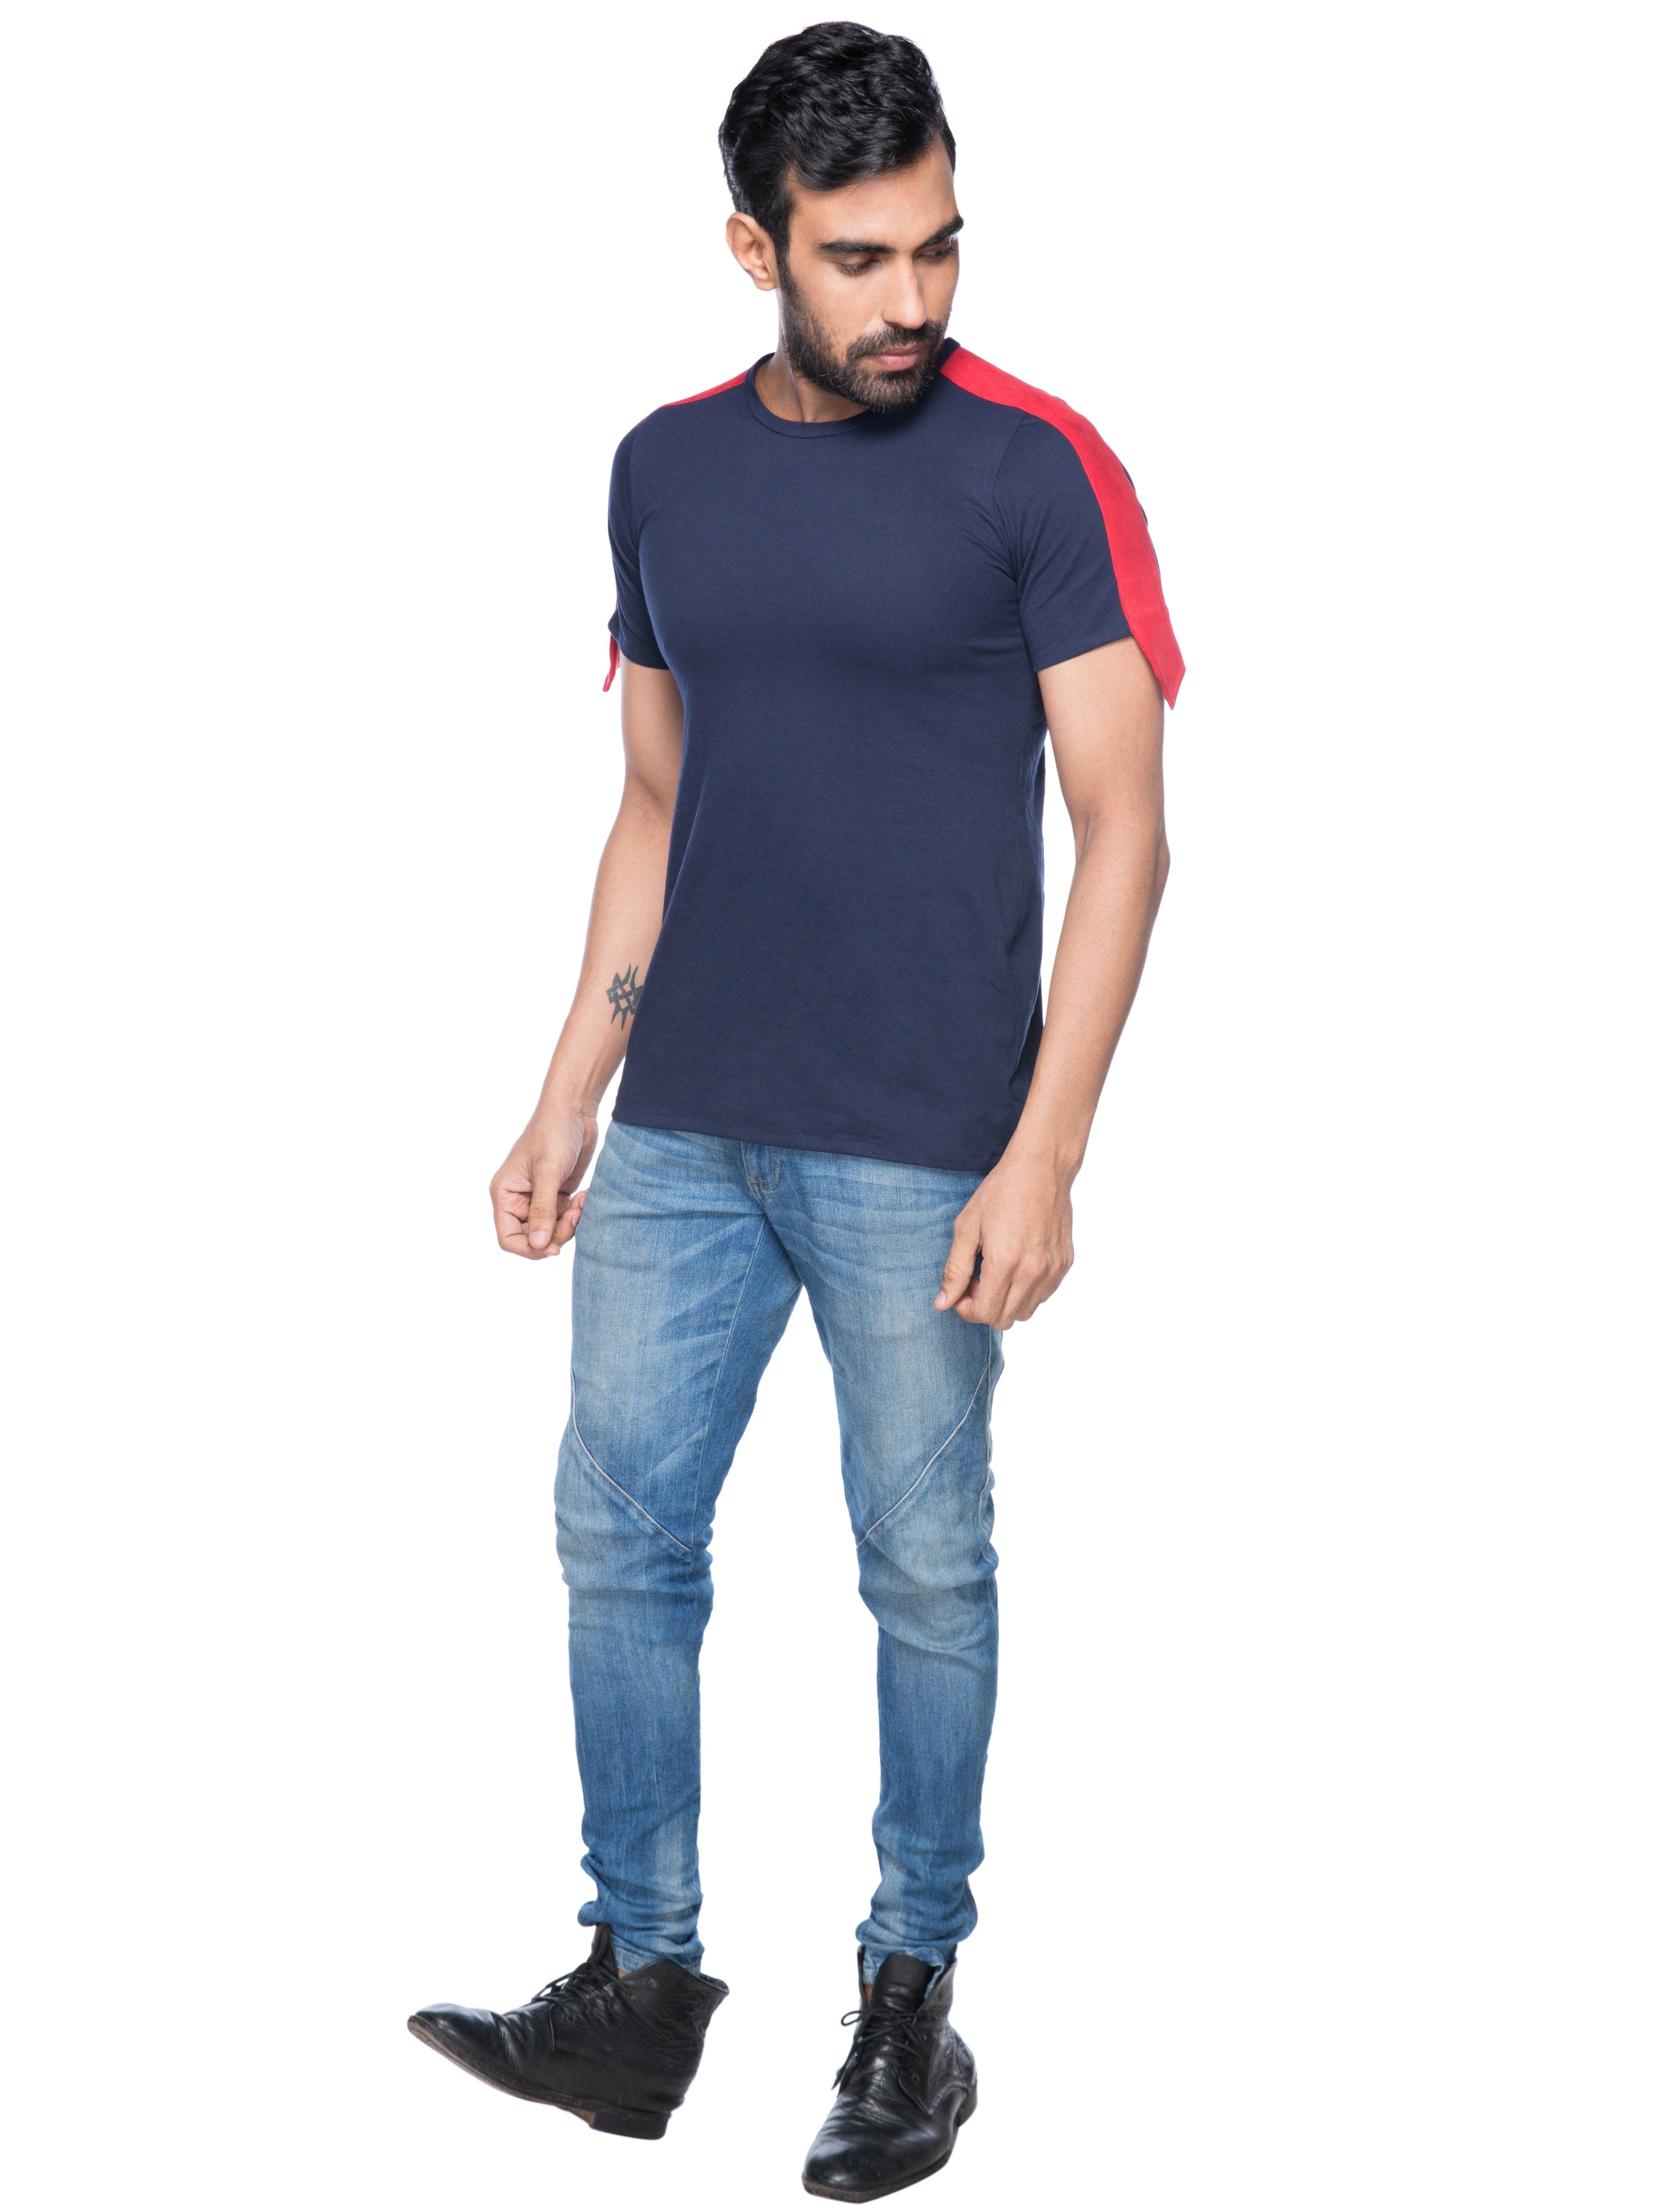 BLUE T-SHIRT WITH RED STRIP FROM SHOULDER